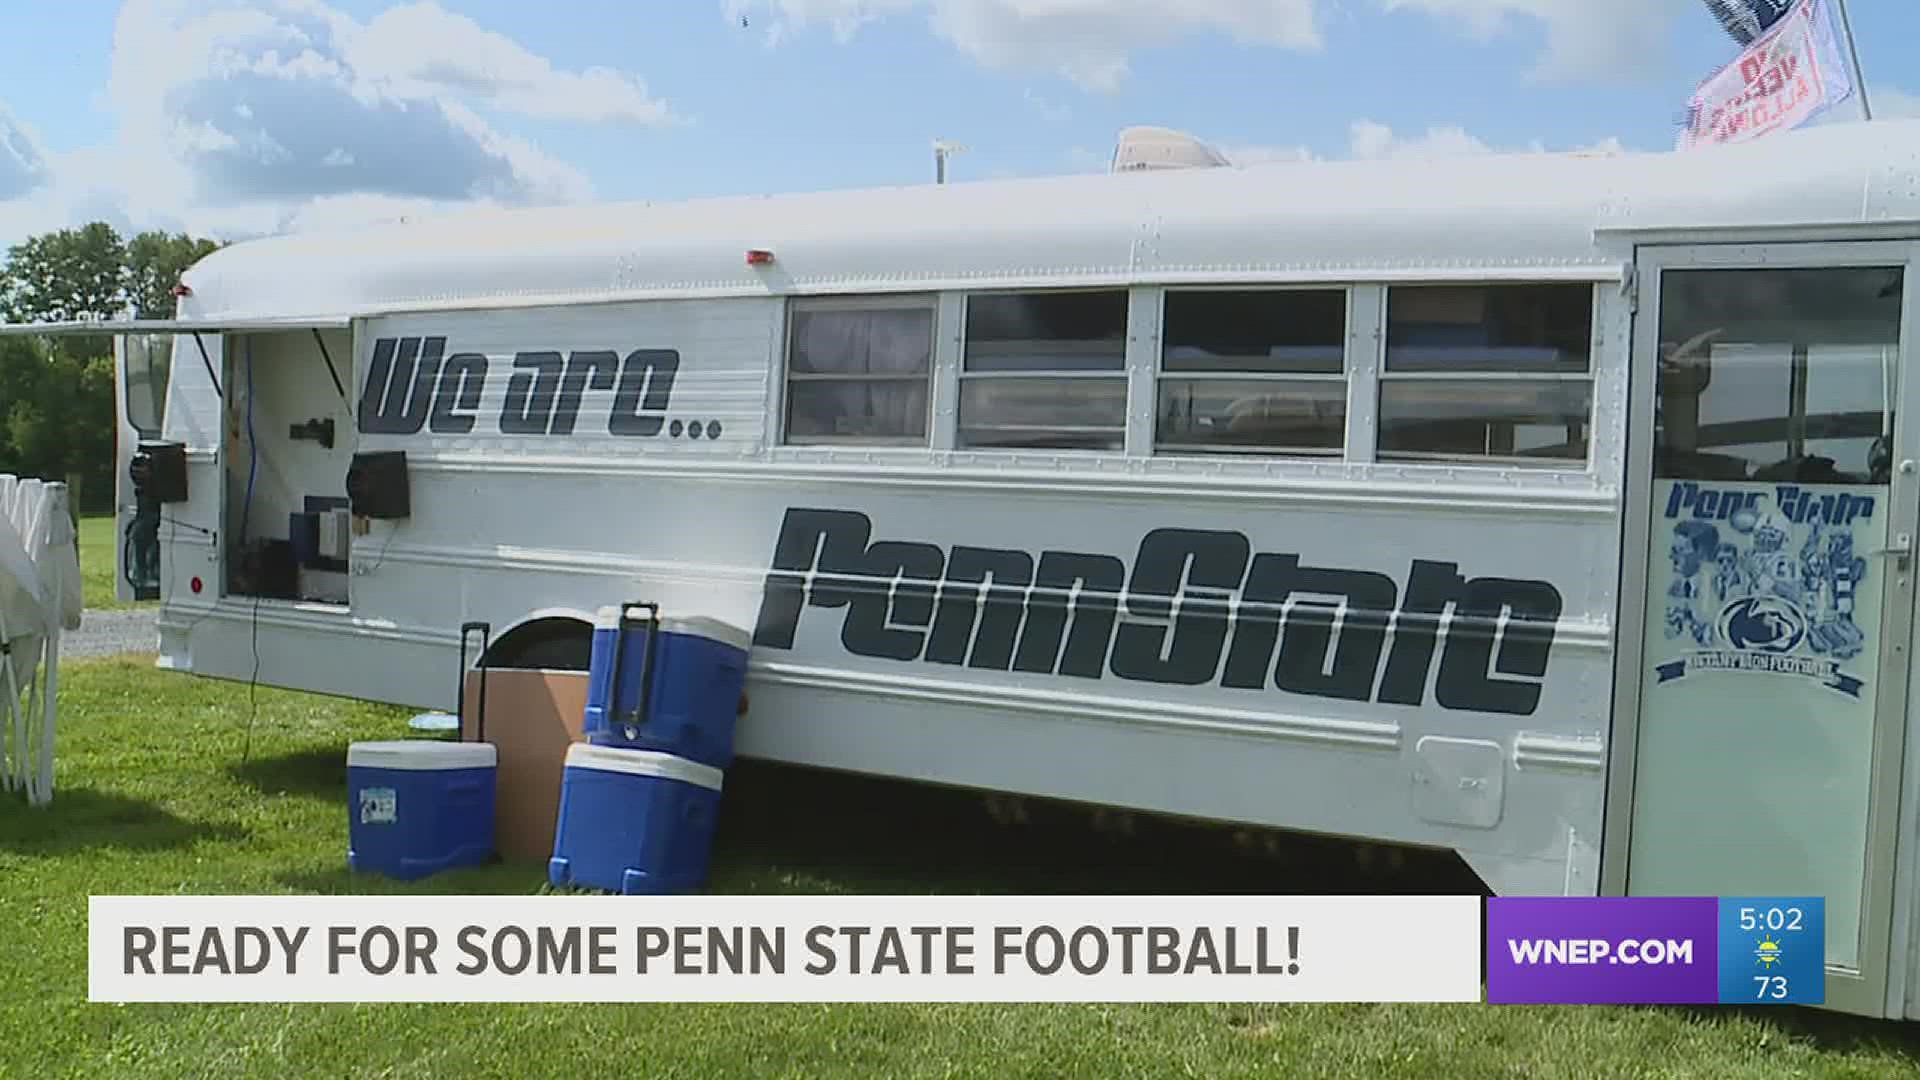 The Penn State Nittany Lions are set to kick off their home opener on Saturday in front of fans for the first time in almost two years.